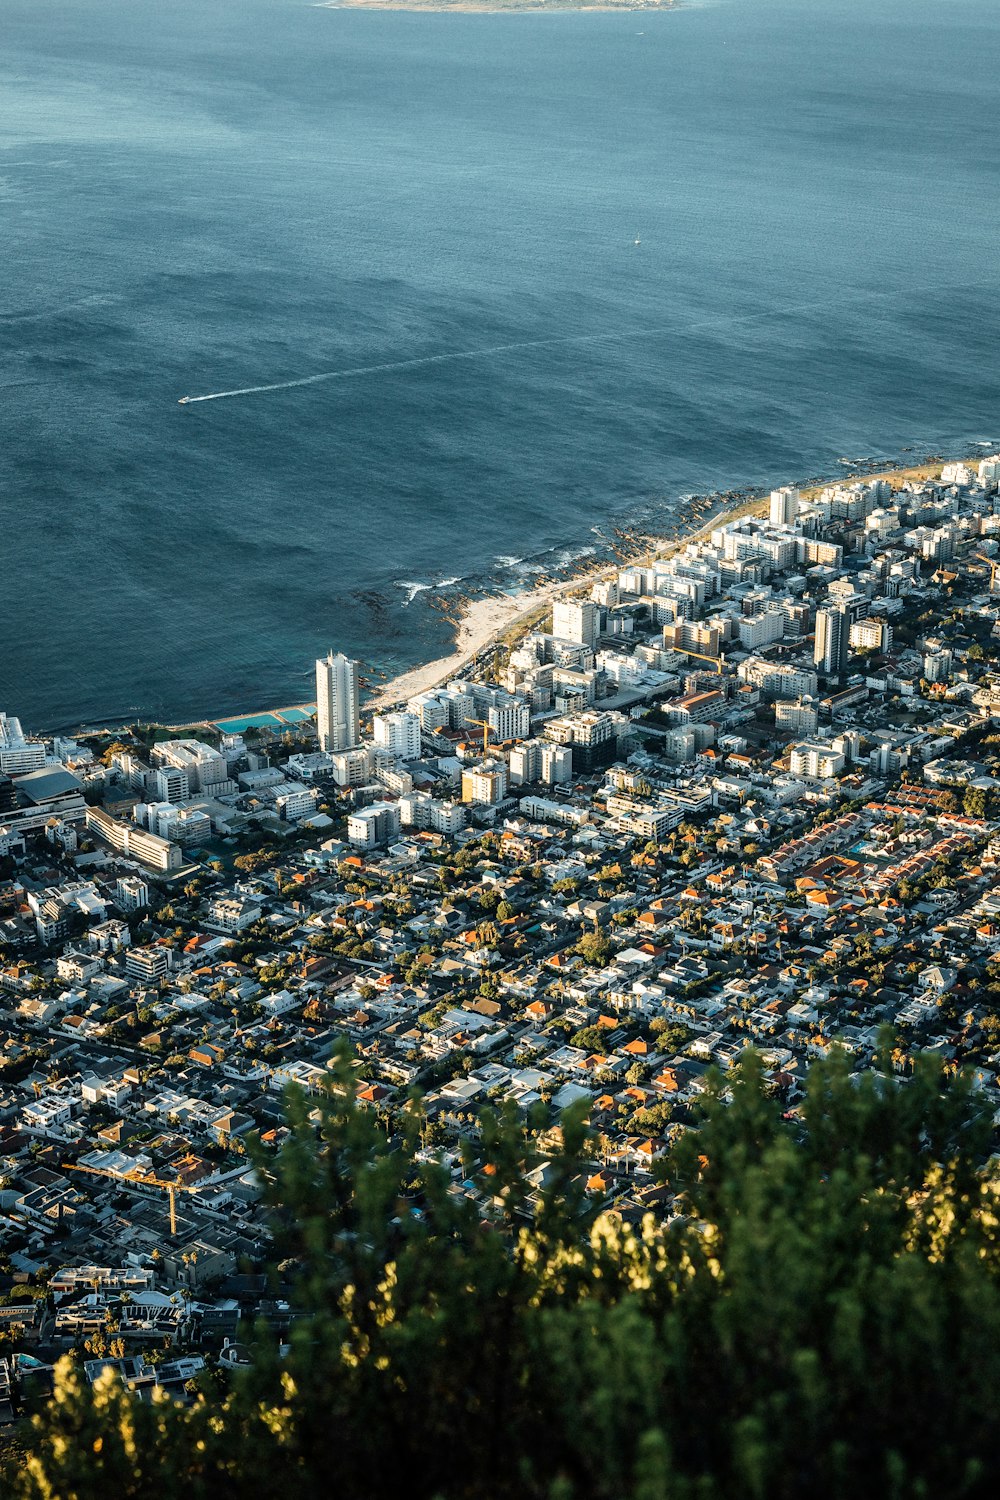 an aerial view of a city next to the ocean